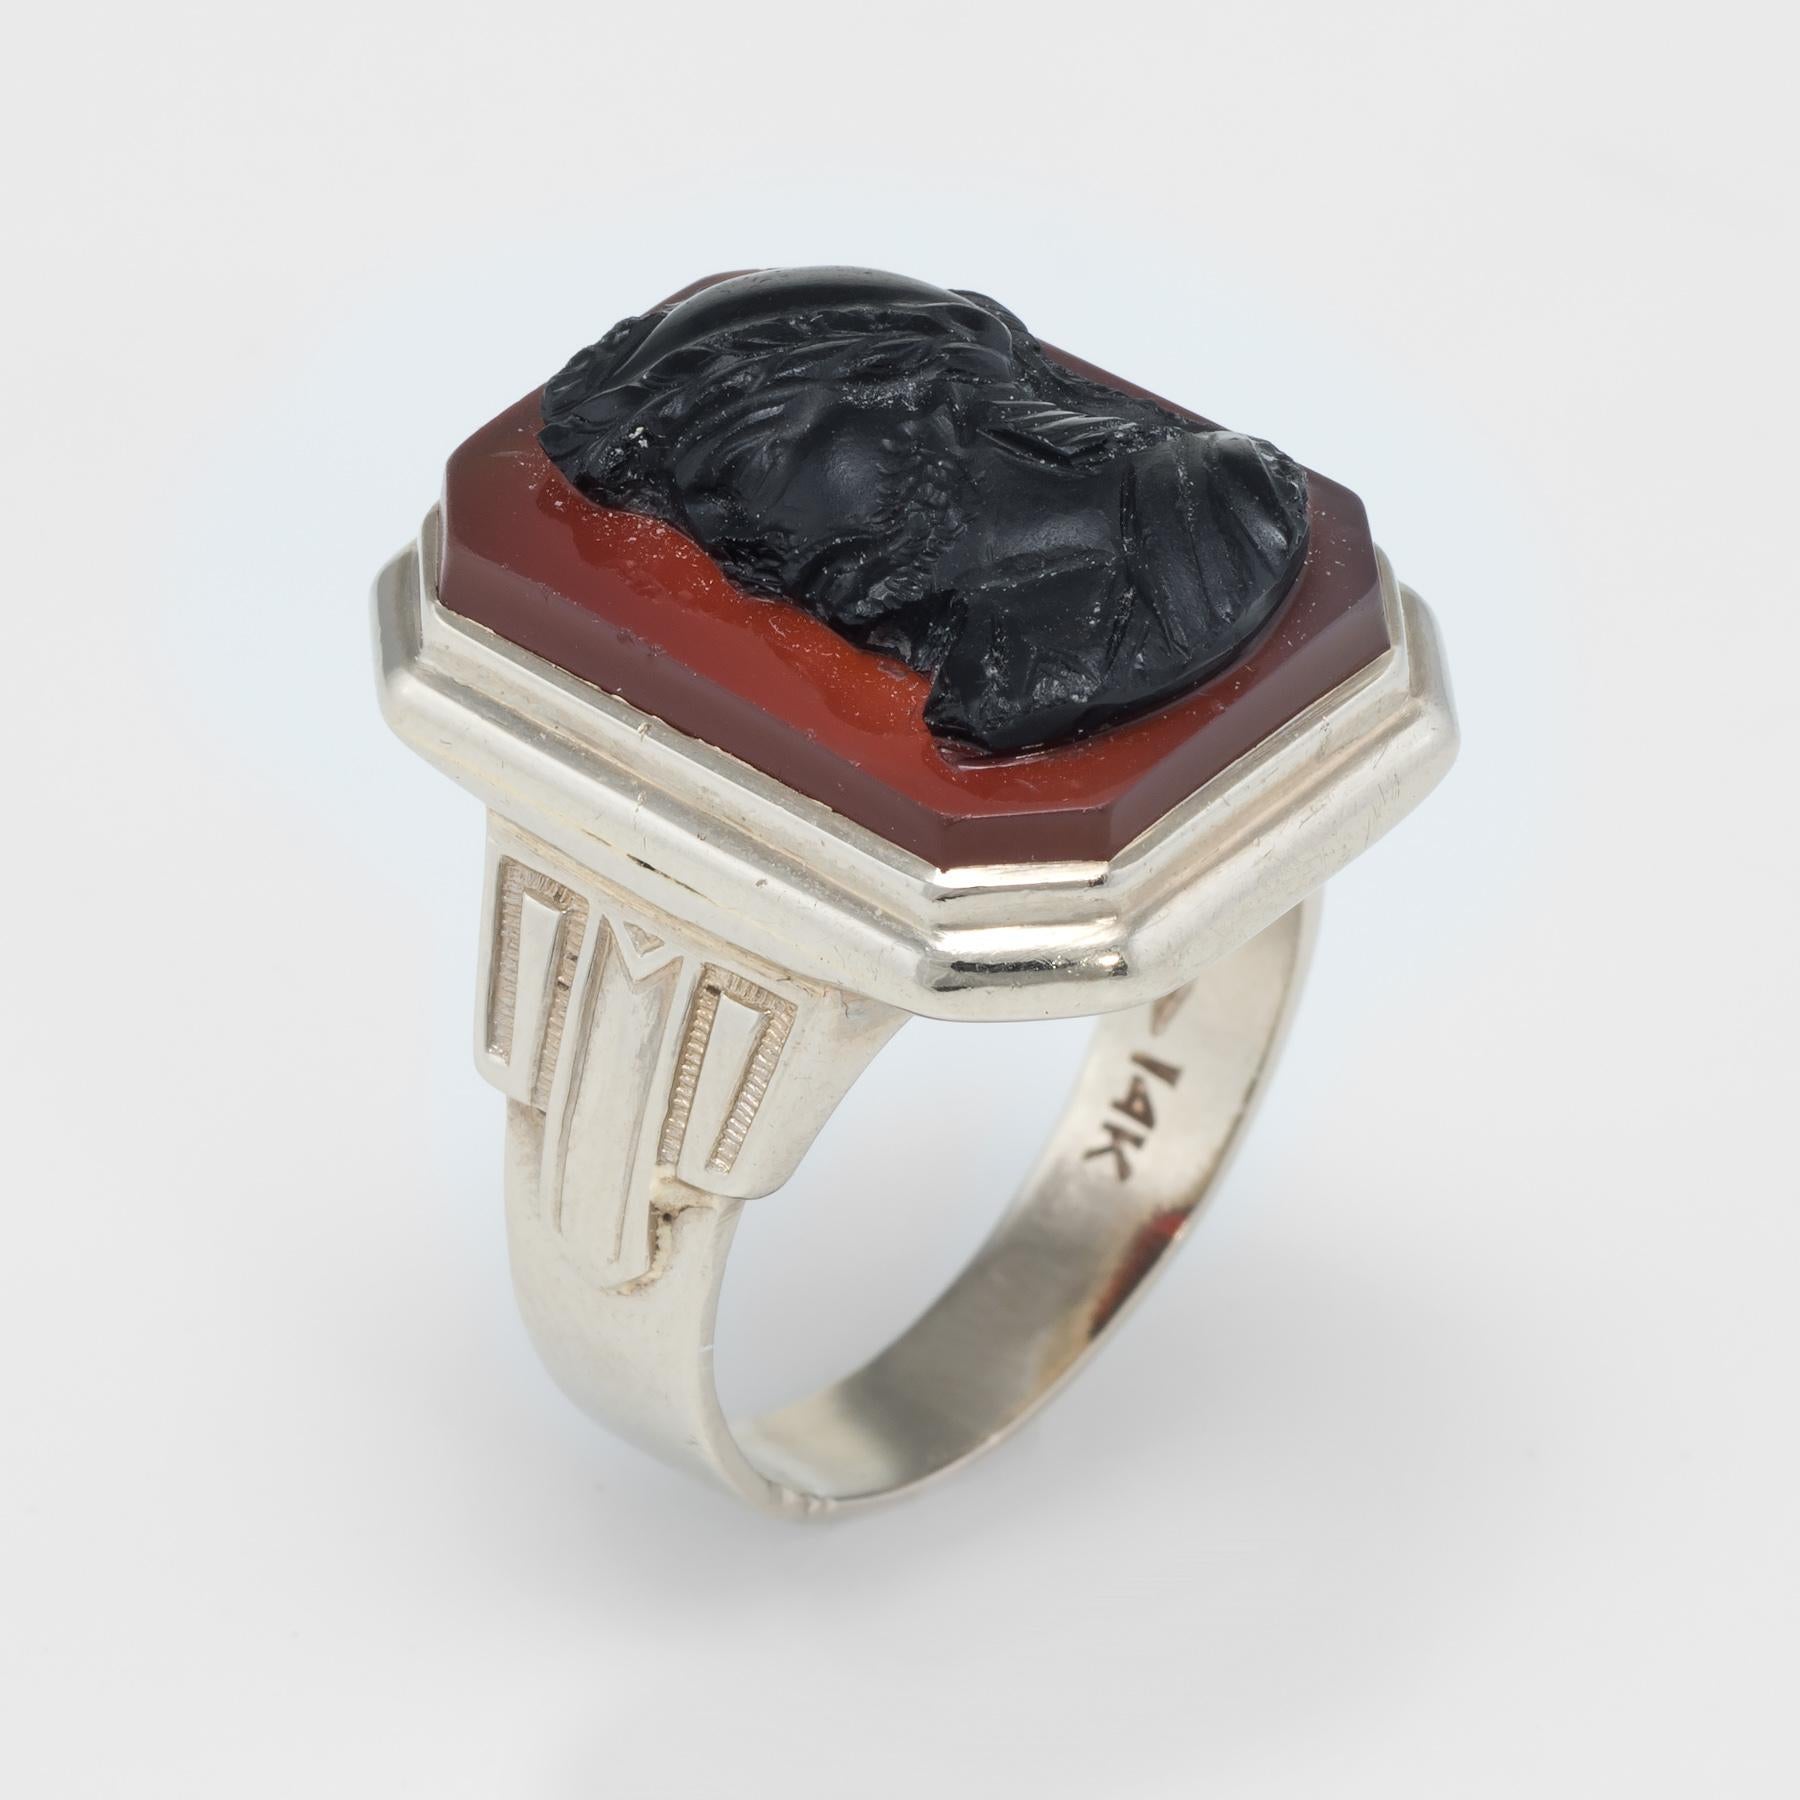 Finely detailed Art Deco era men's ring (circa 1920s to 1930s), crafted in 14 karat white gold. 

Hardstone cameo is carved in the form of a Roman Soldier and measures 18.5mm x 12.5mm. The cameo sits upon a carnelian backdrop that measures 19mm x